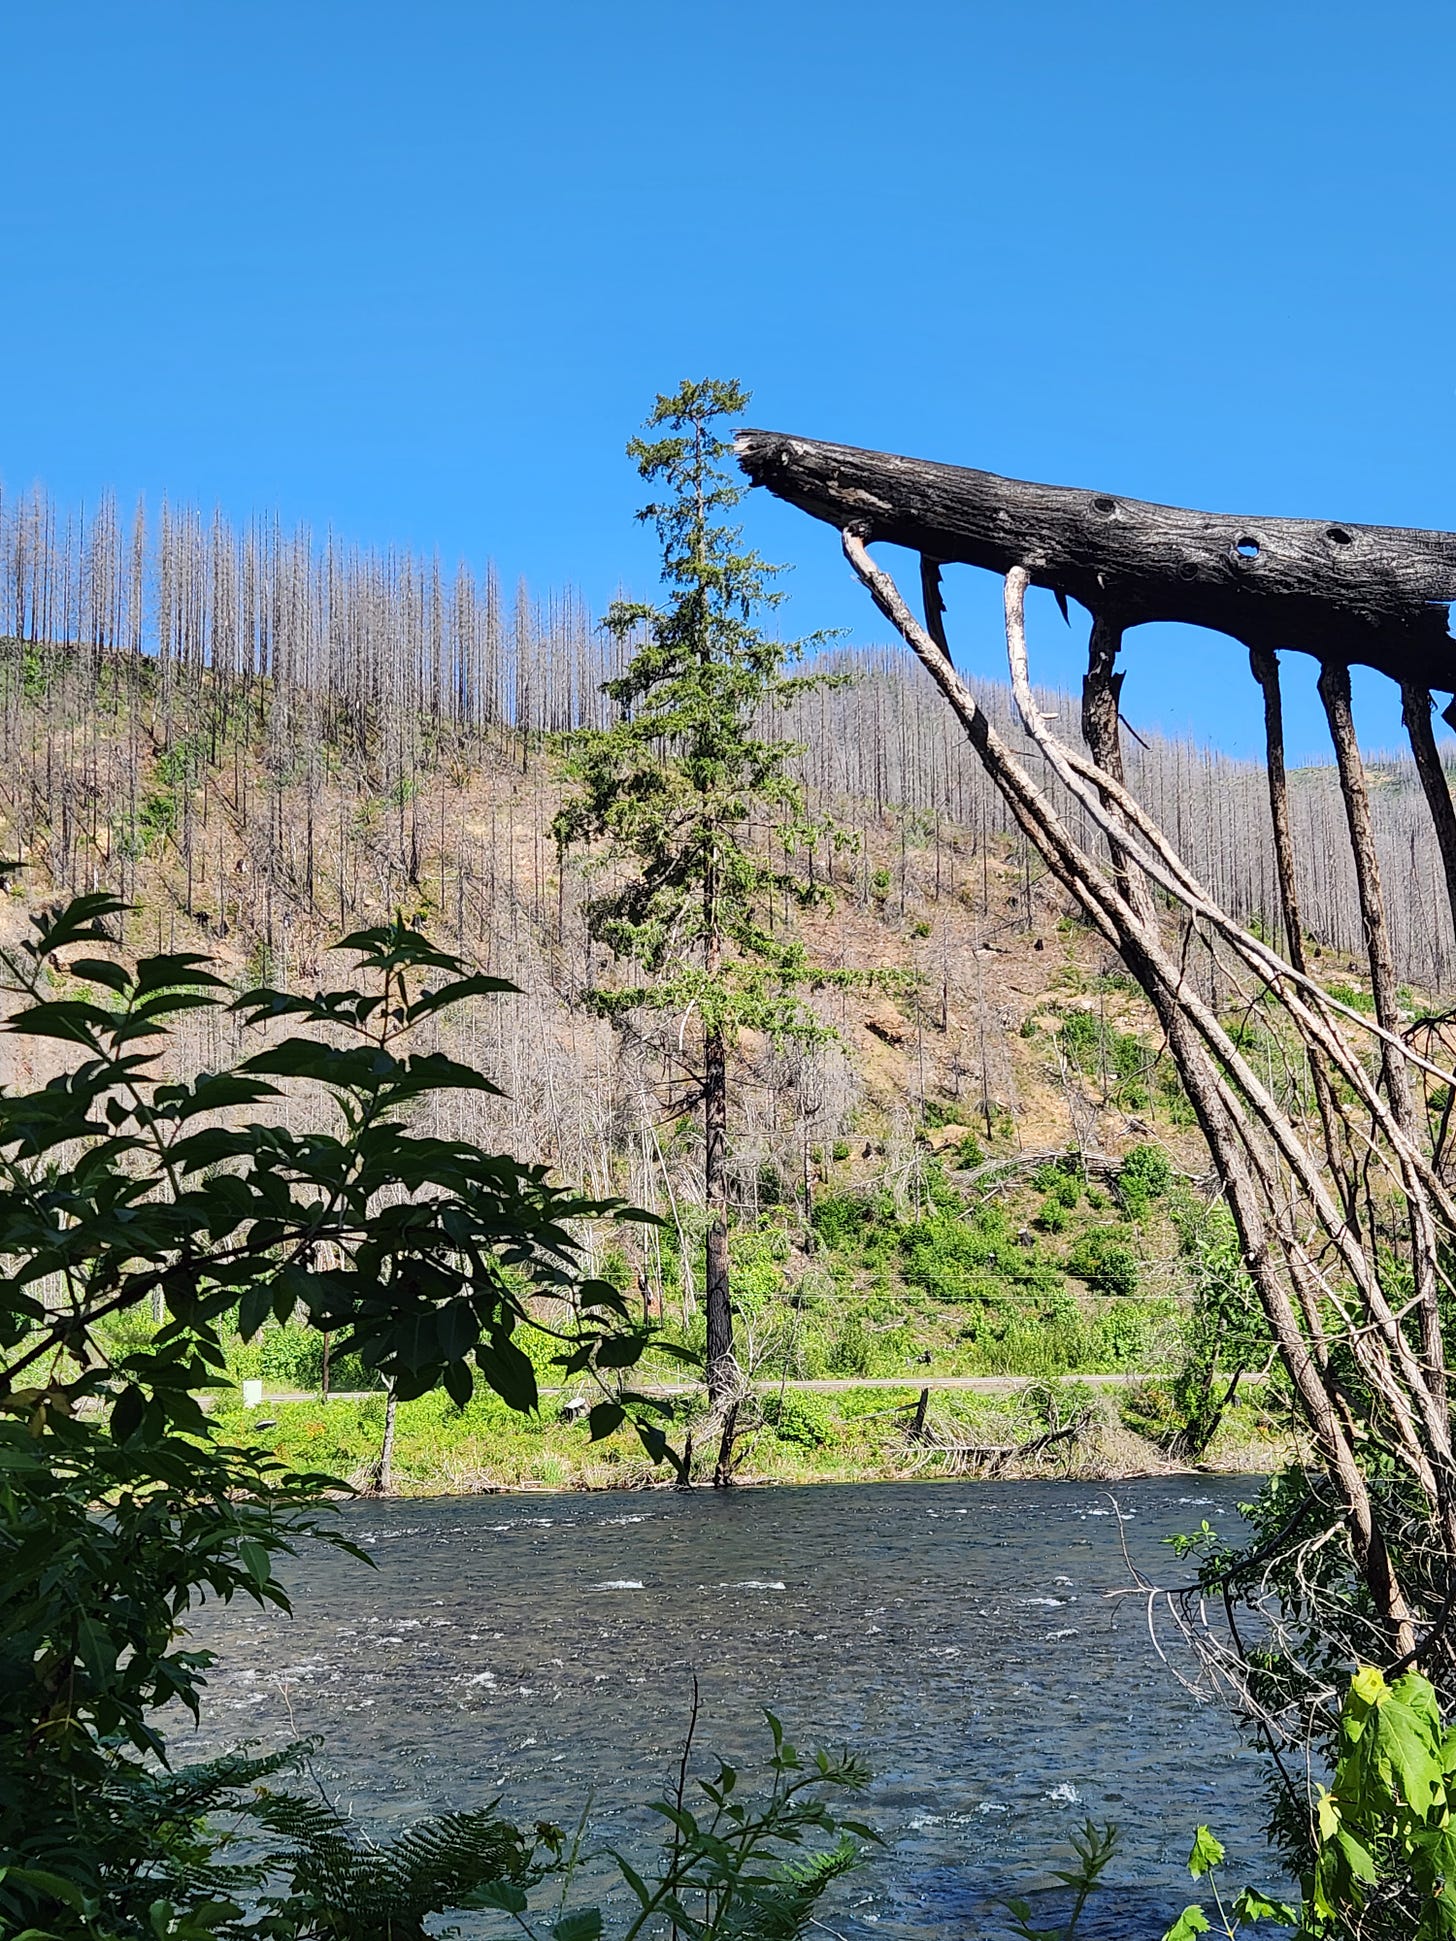 river in foreground, background hillside covered in burned, dead trees, a single pine stands green in the center 